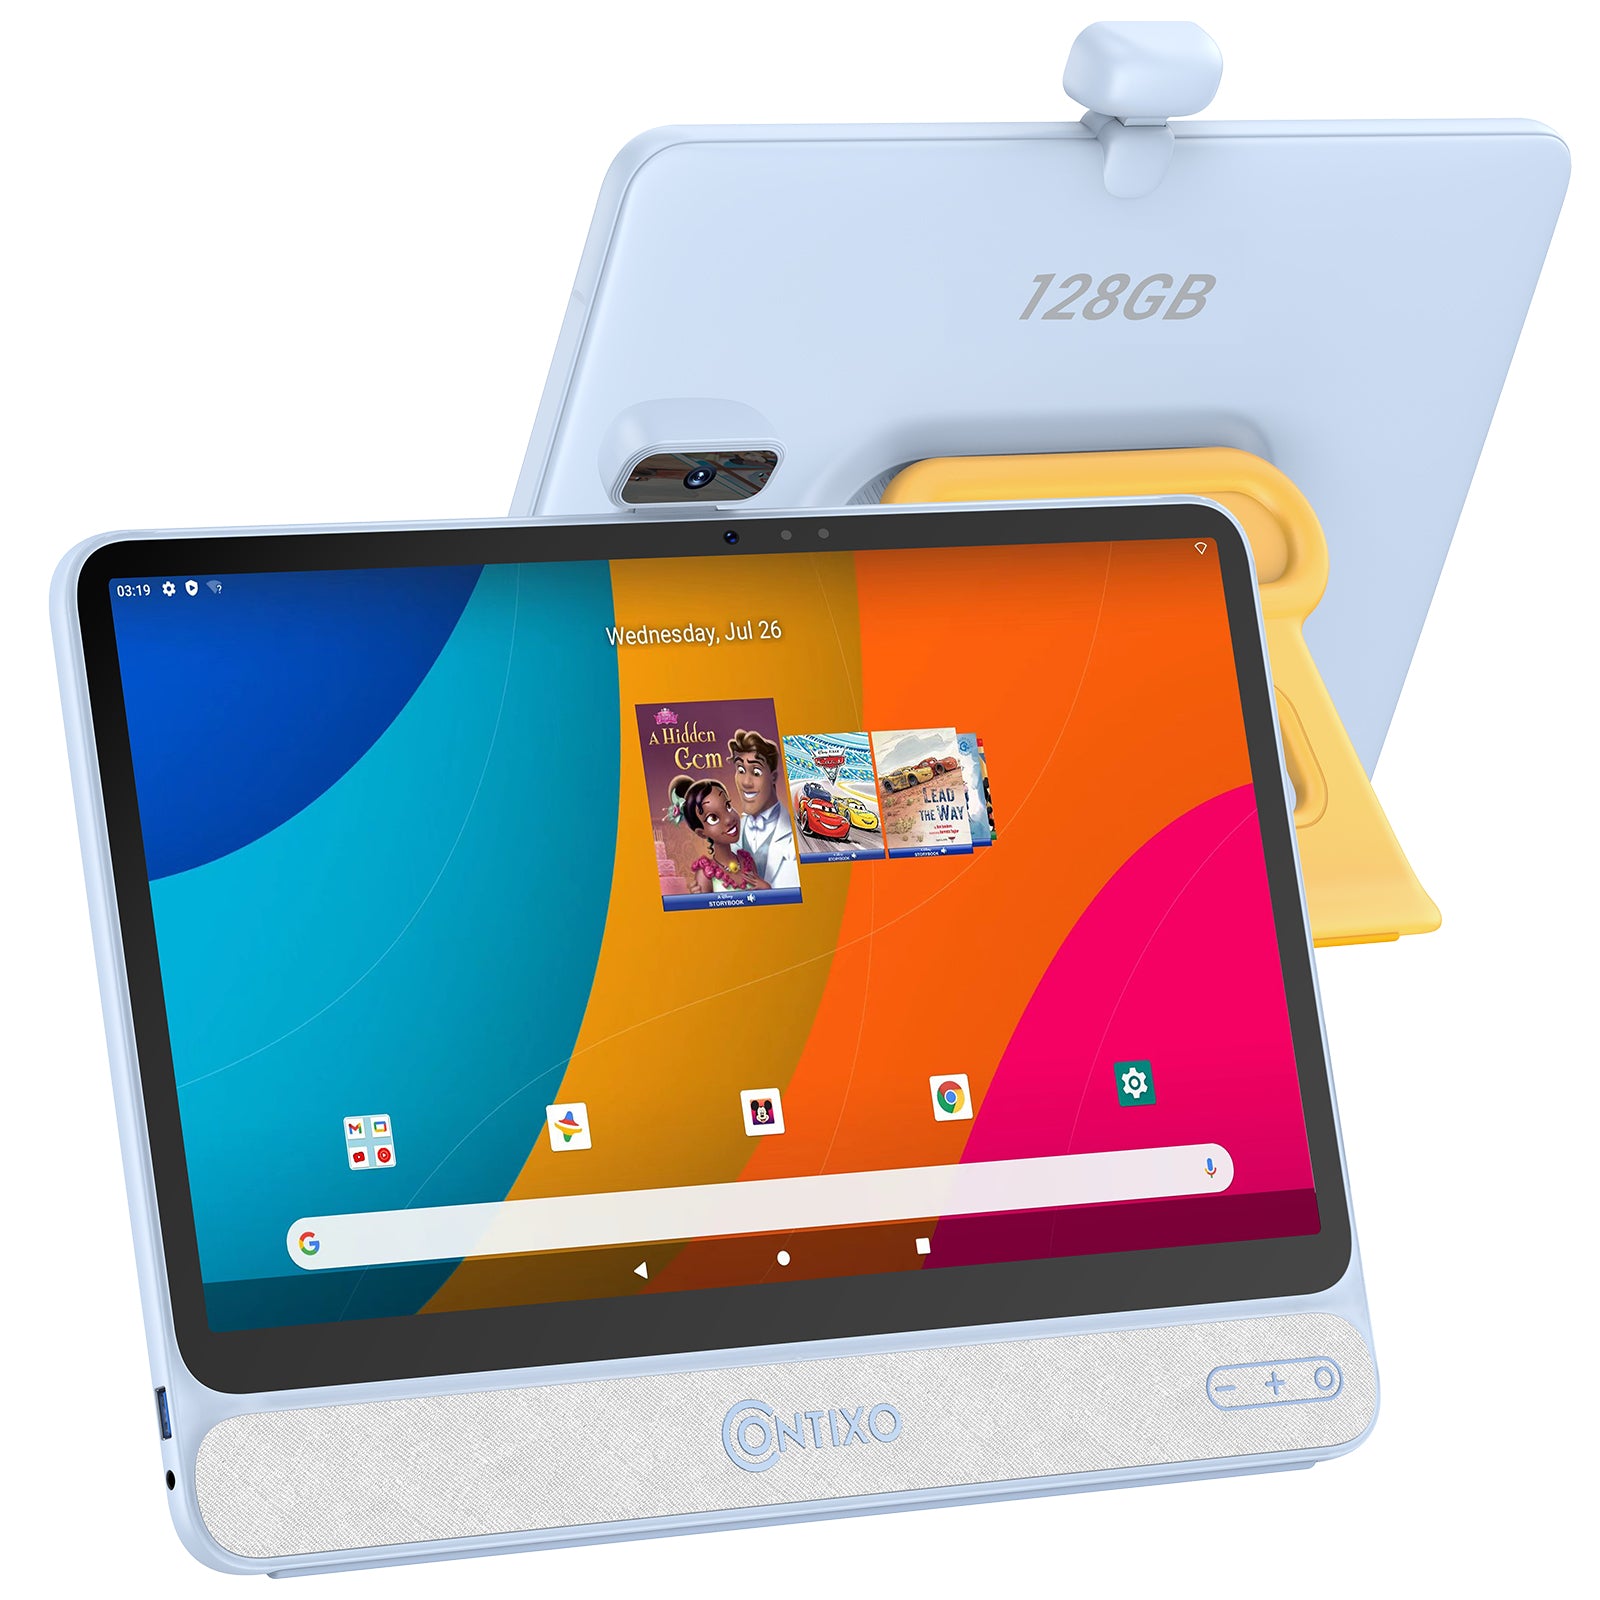 Alcatel JOY TAB KIDS 2 educational tablet lets kids learn and play